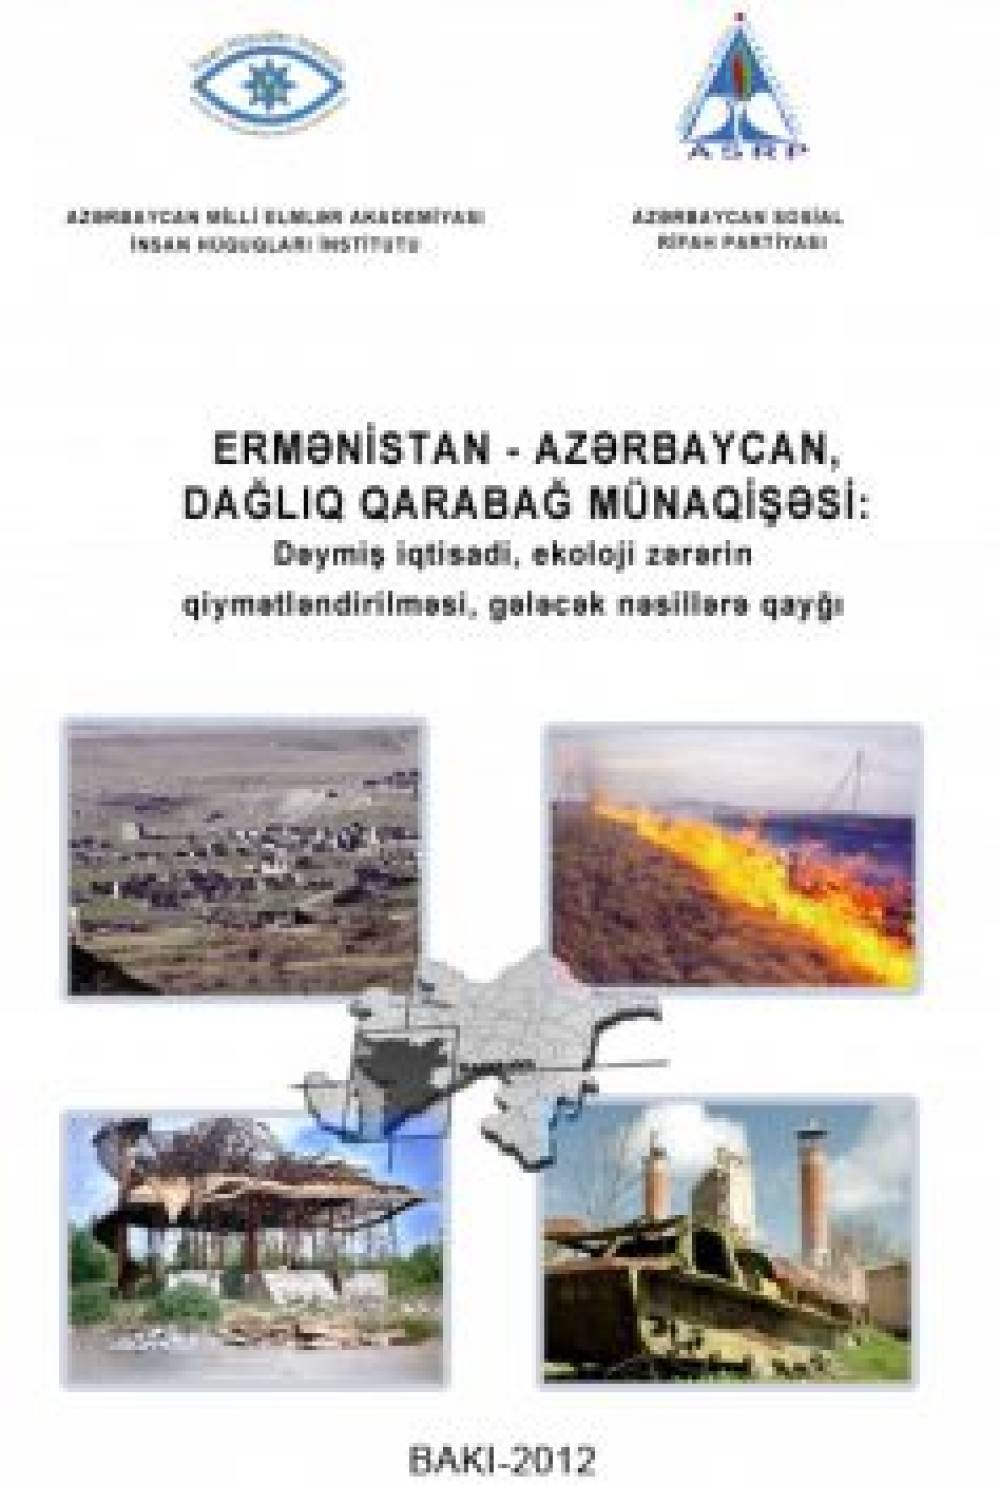 The armenian-azerbaijani nagorno-karabakh conflict: assessment of the resulting economic and environmental damage, concern about the future generation